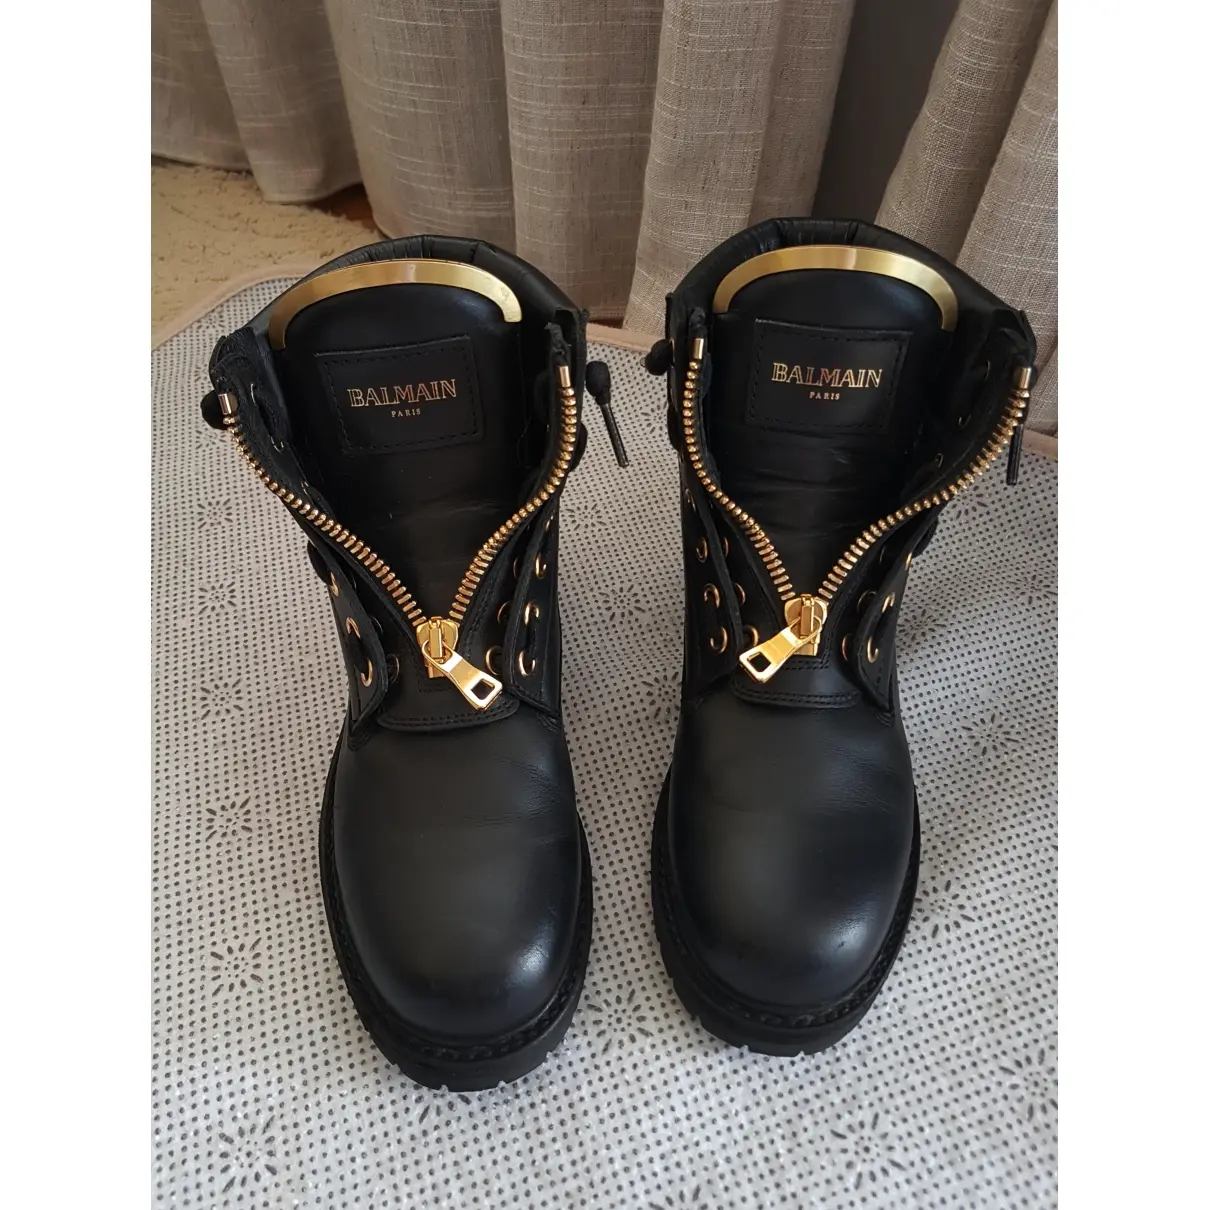 Balmain Army leather biker boots for sale